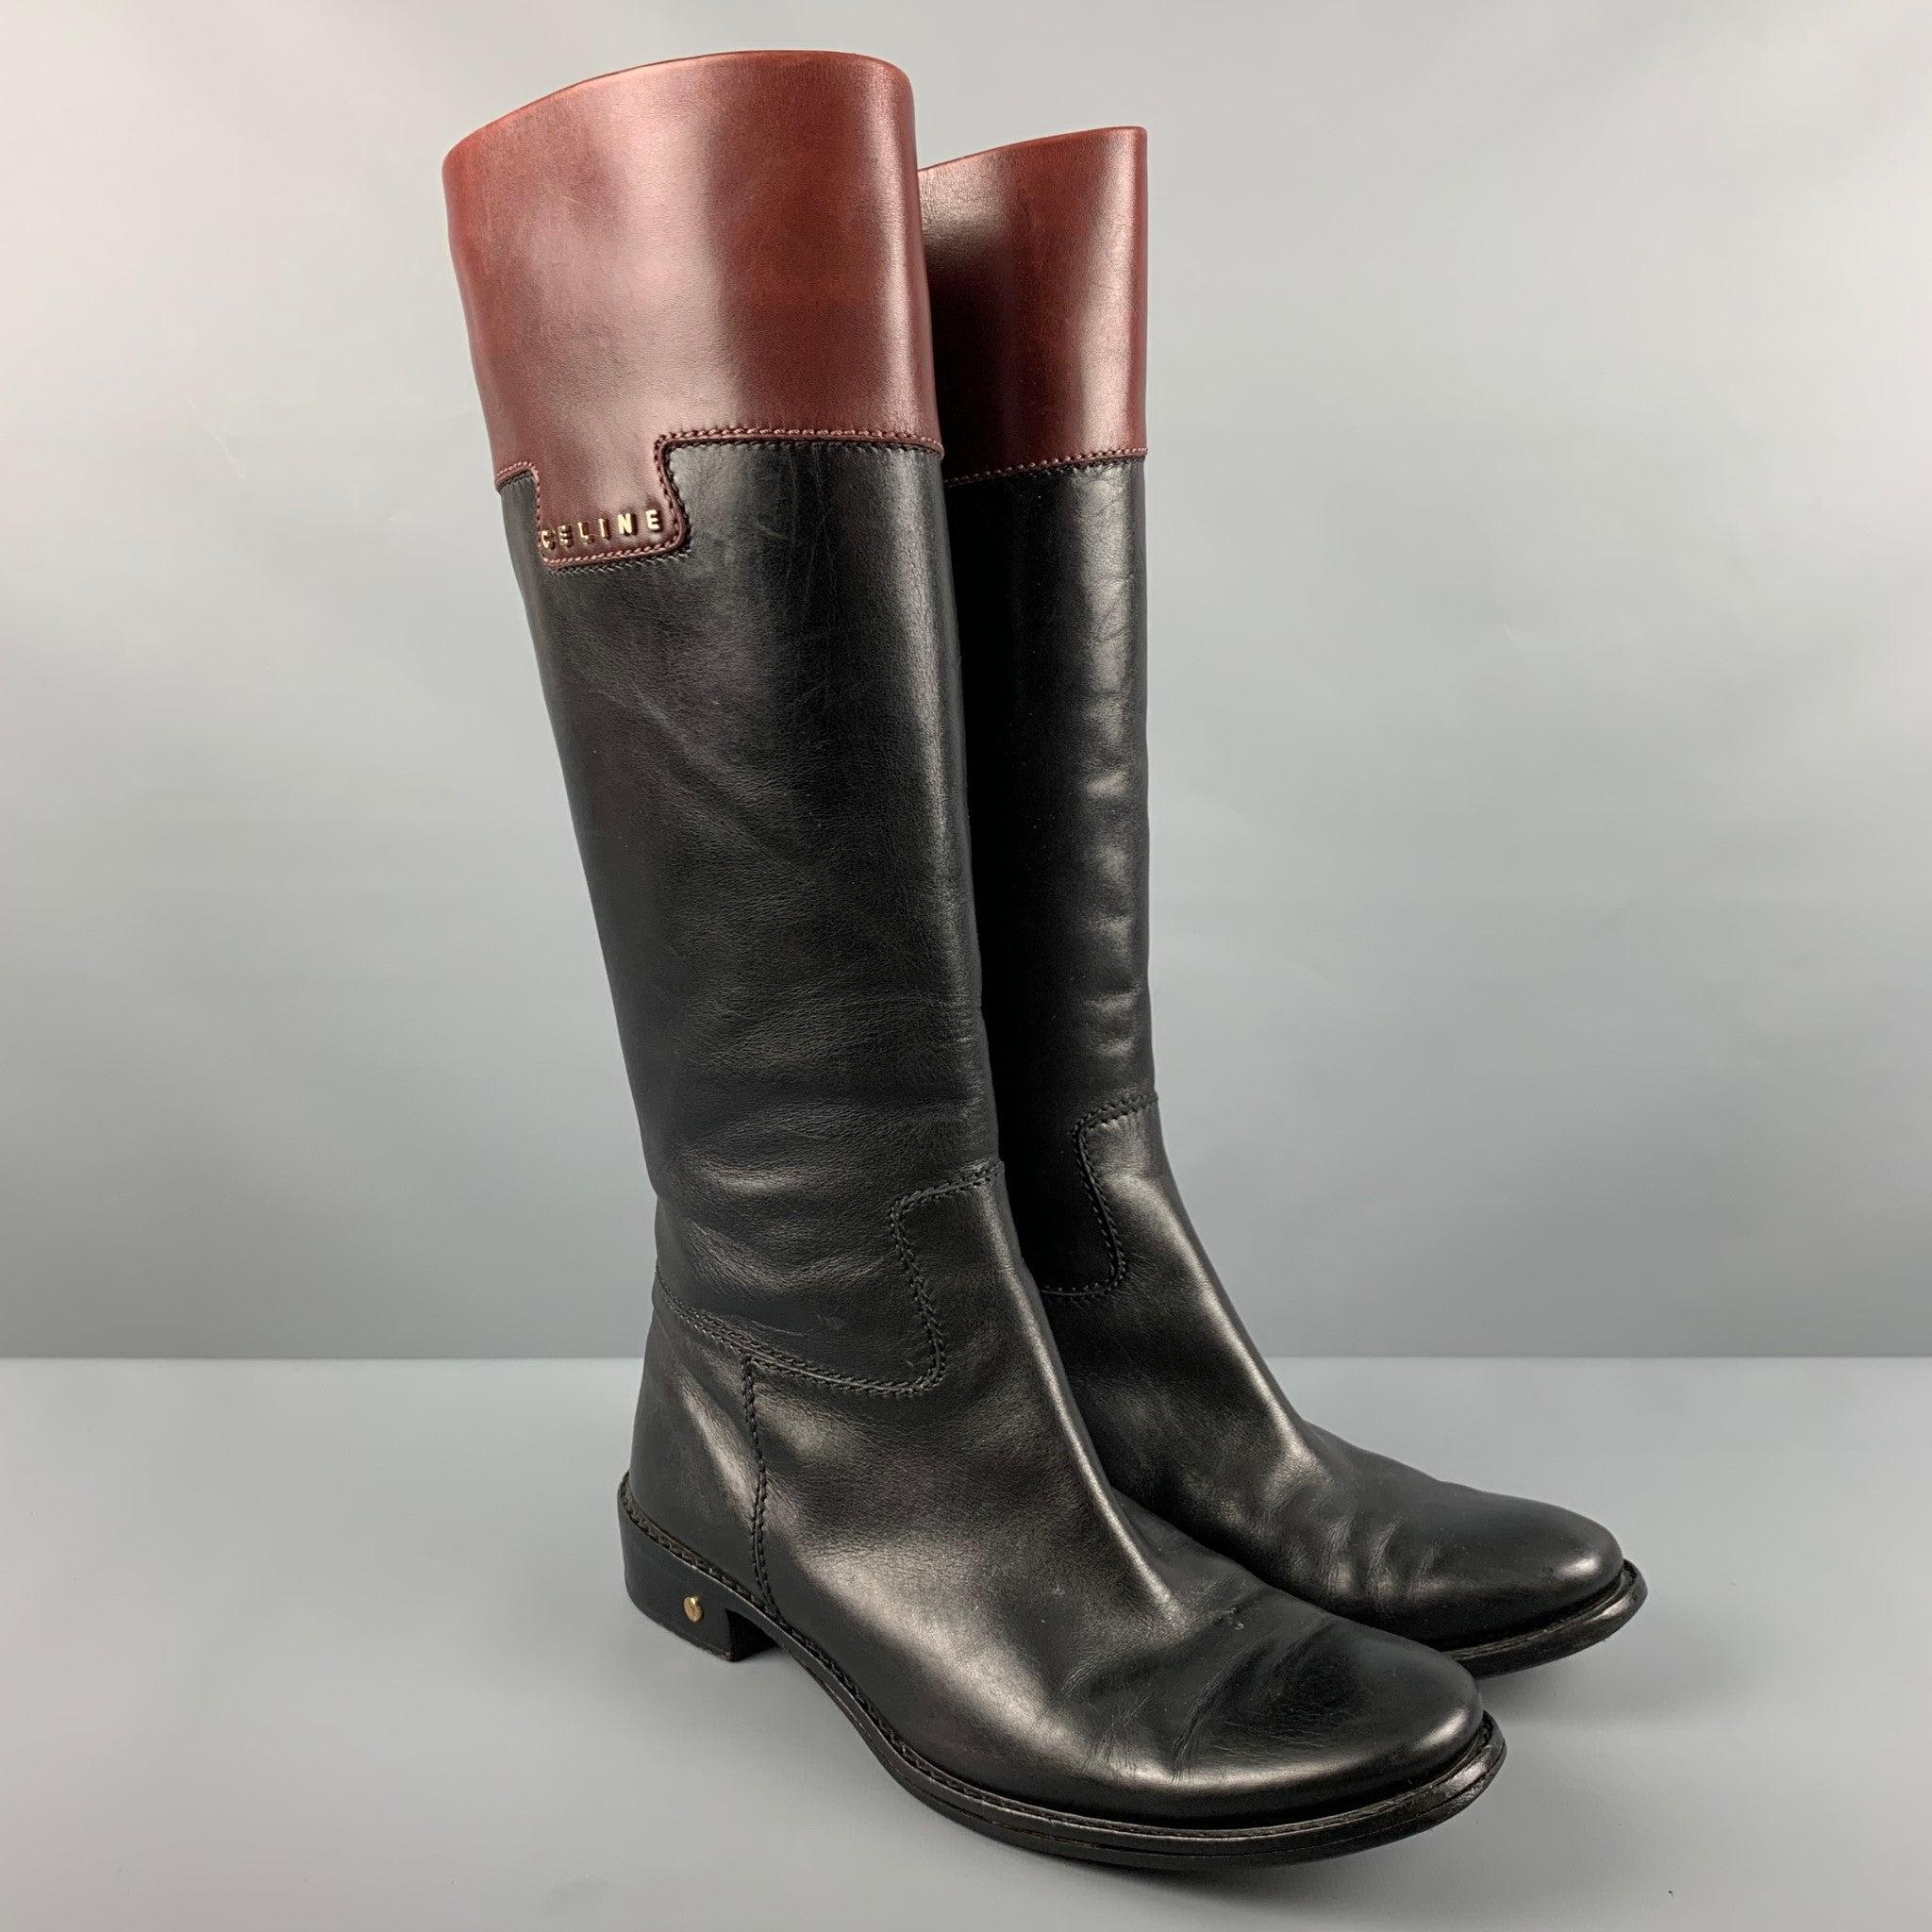 CELINE riding boots comes in a brown and black leather featuring a pull on style, gold tone CELINE hardware, round toe, and a wooden sole. Good Pre-Owned Condition. Moderate signs of wear. As-is. 

Marked:   37 

Measurements: 
  Length: 11 inches